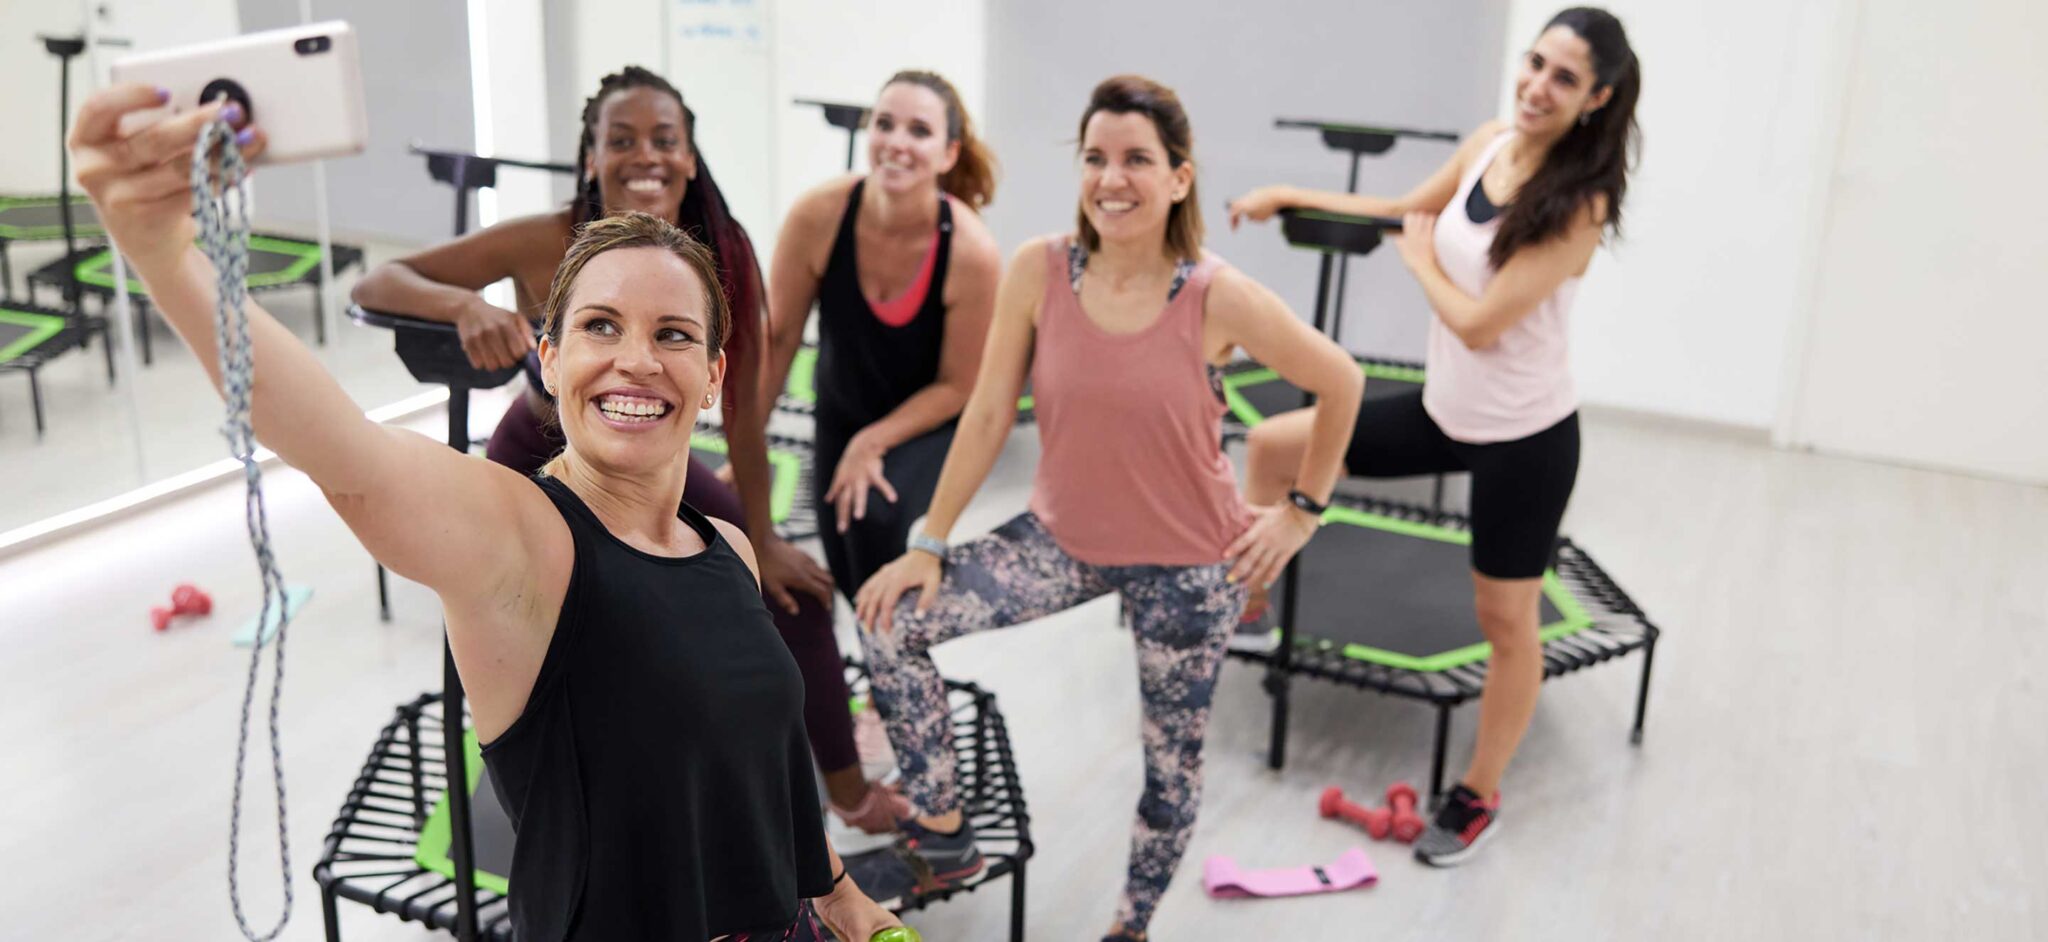 A group of ladies taking selfie at a fitness studio